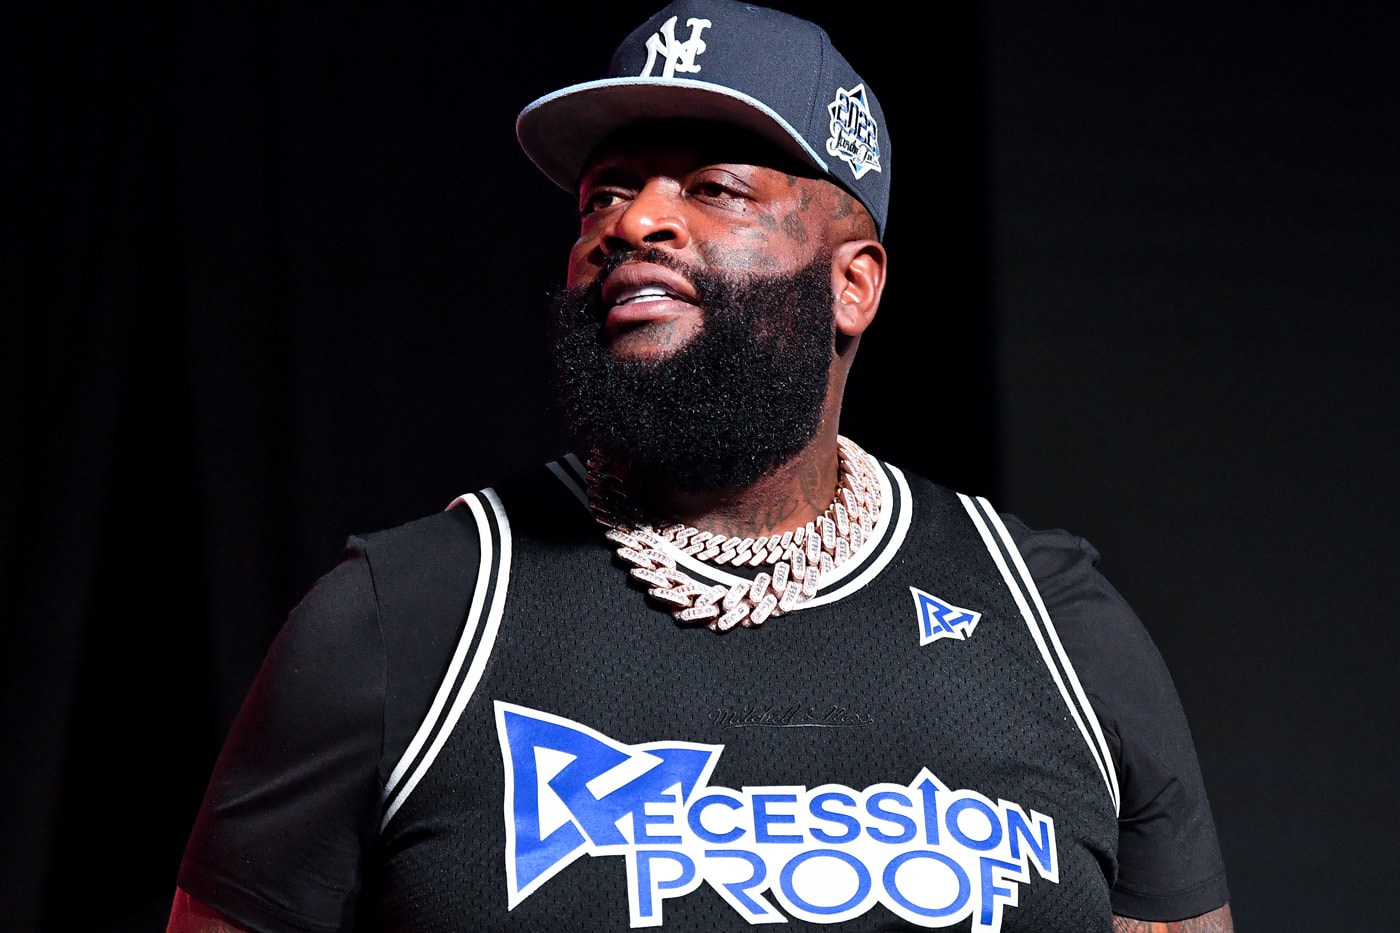 Wrist Check: Rick Ross Shows off Blinged Out One-of-One $20 Million USD Jacob & Co. Watch jacob the jeweler gold diamonds billionaire tsavorites emerald